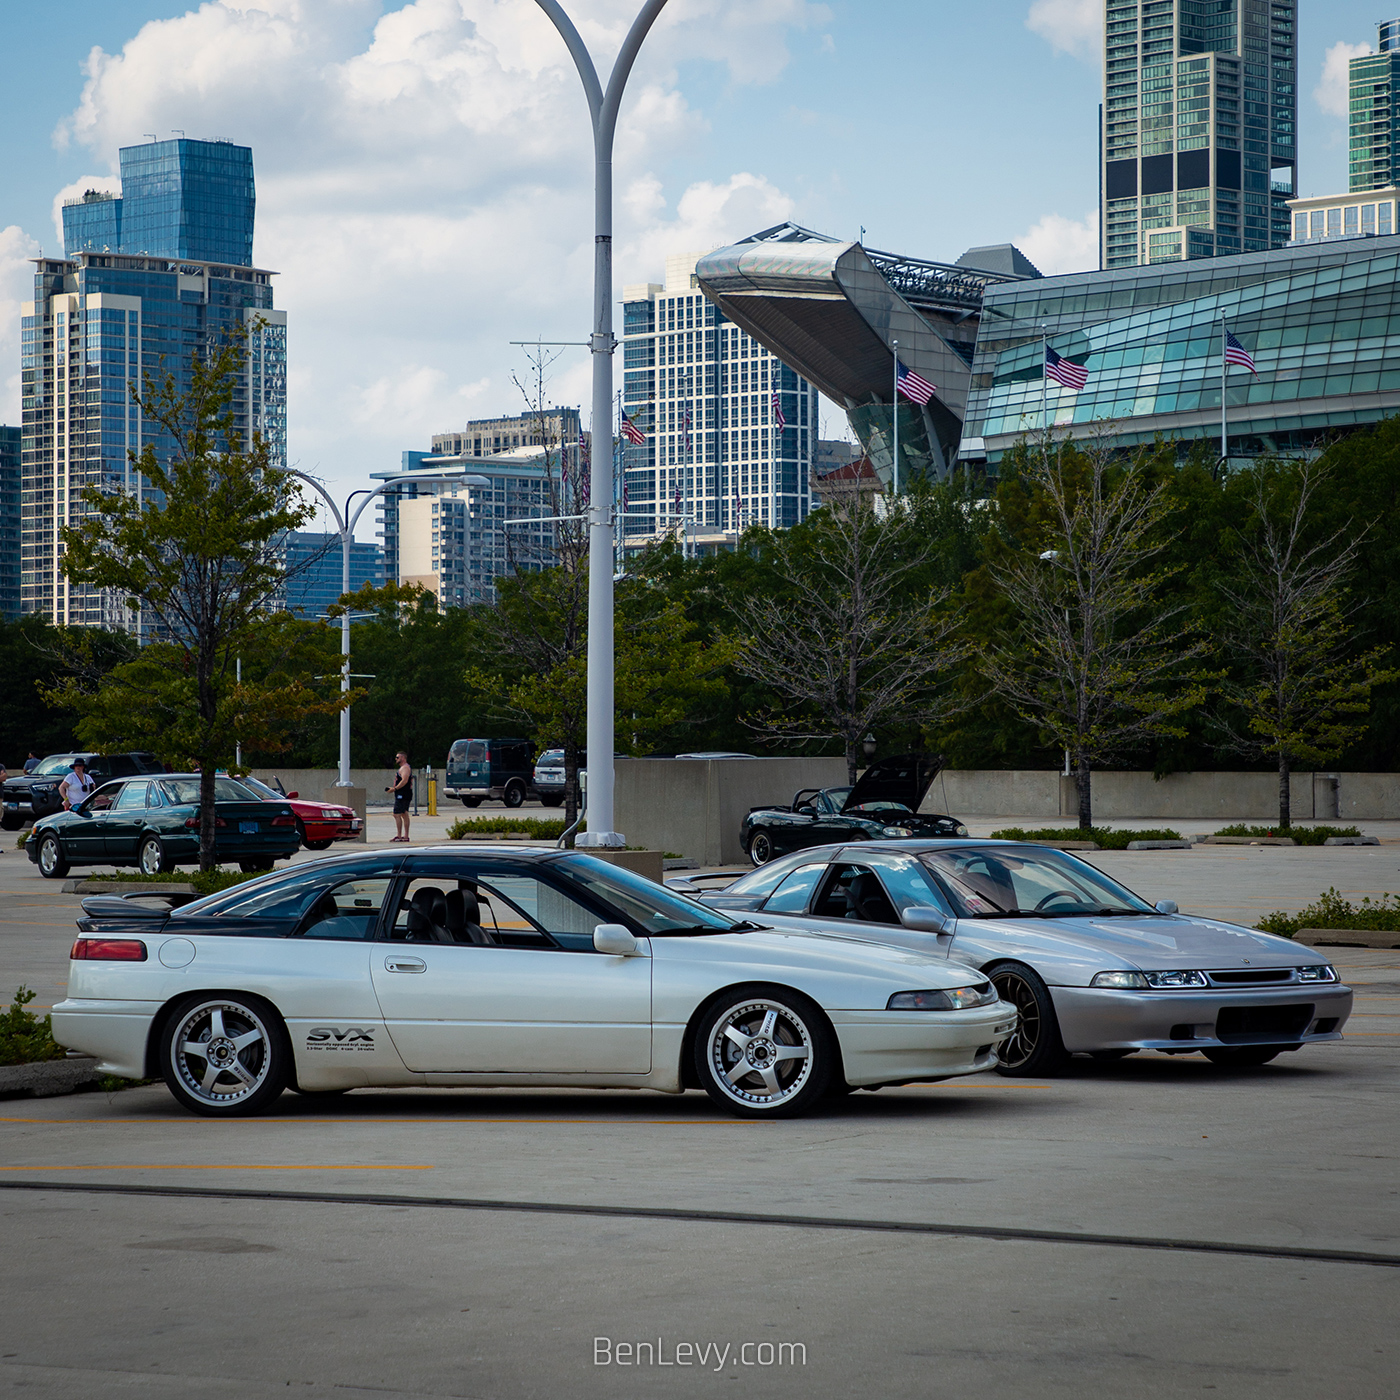 Subaru SVX at 90s Car Show in Chicago